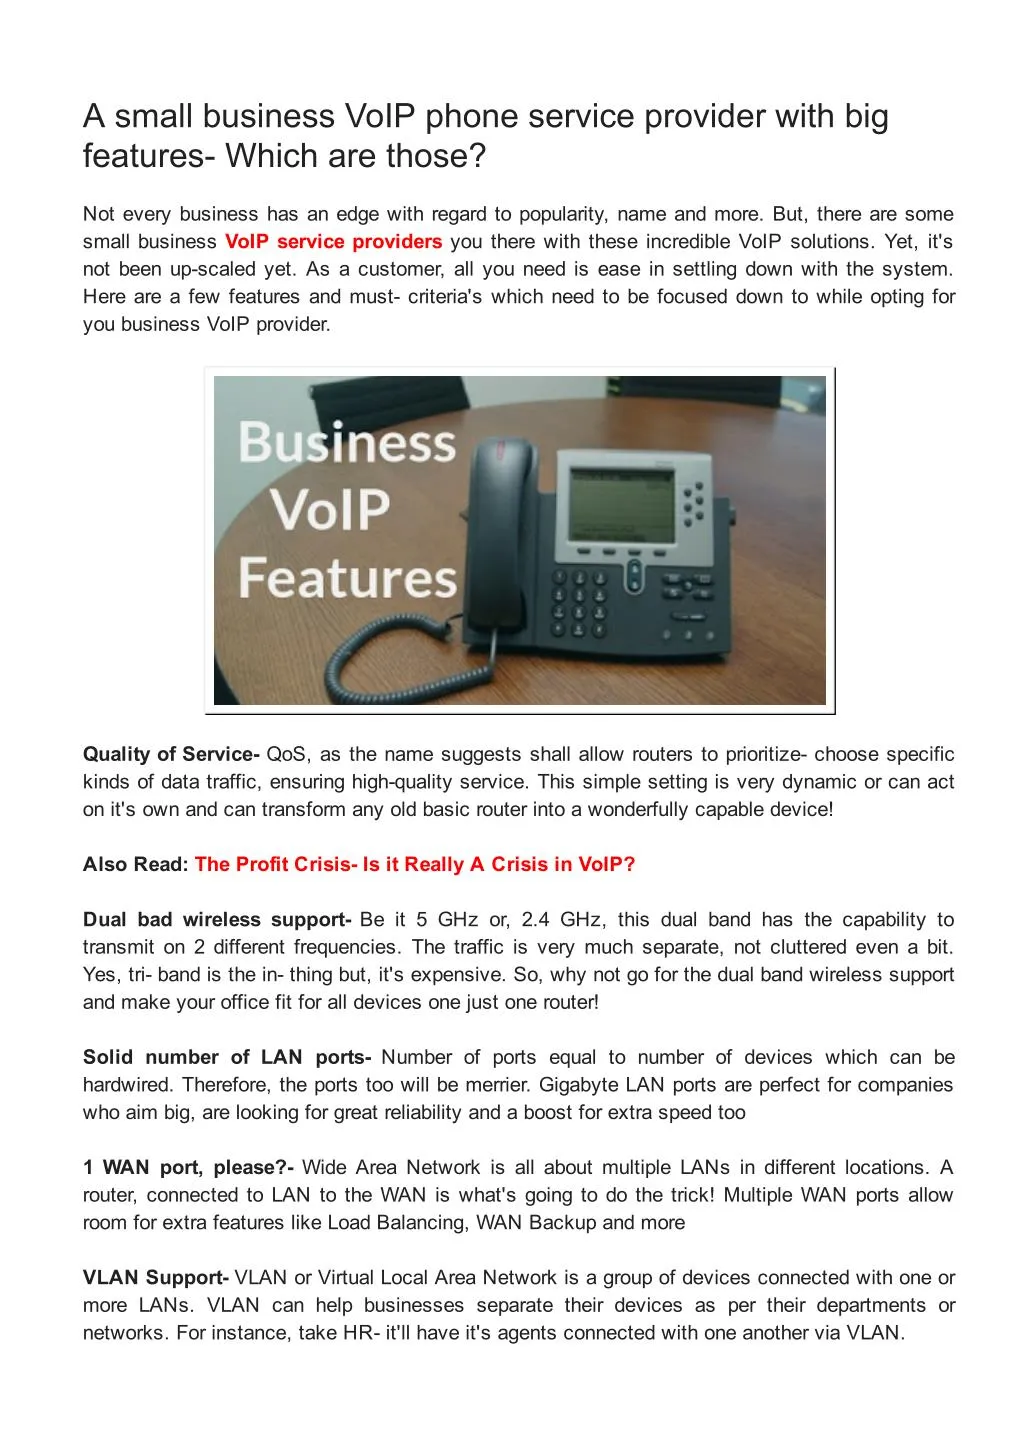 a small business voip phone service provider with